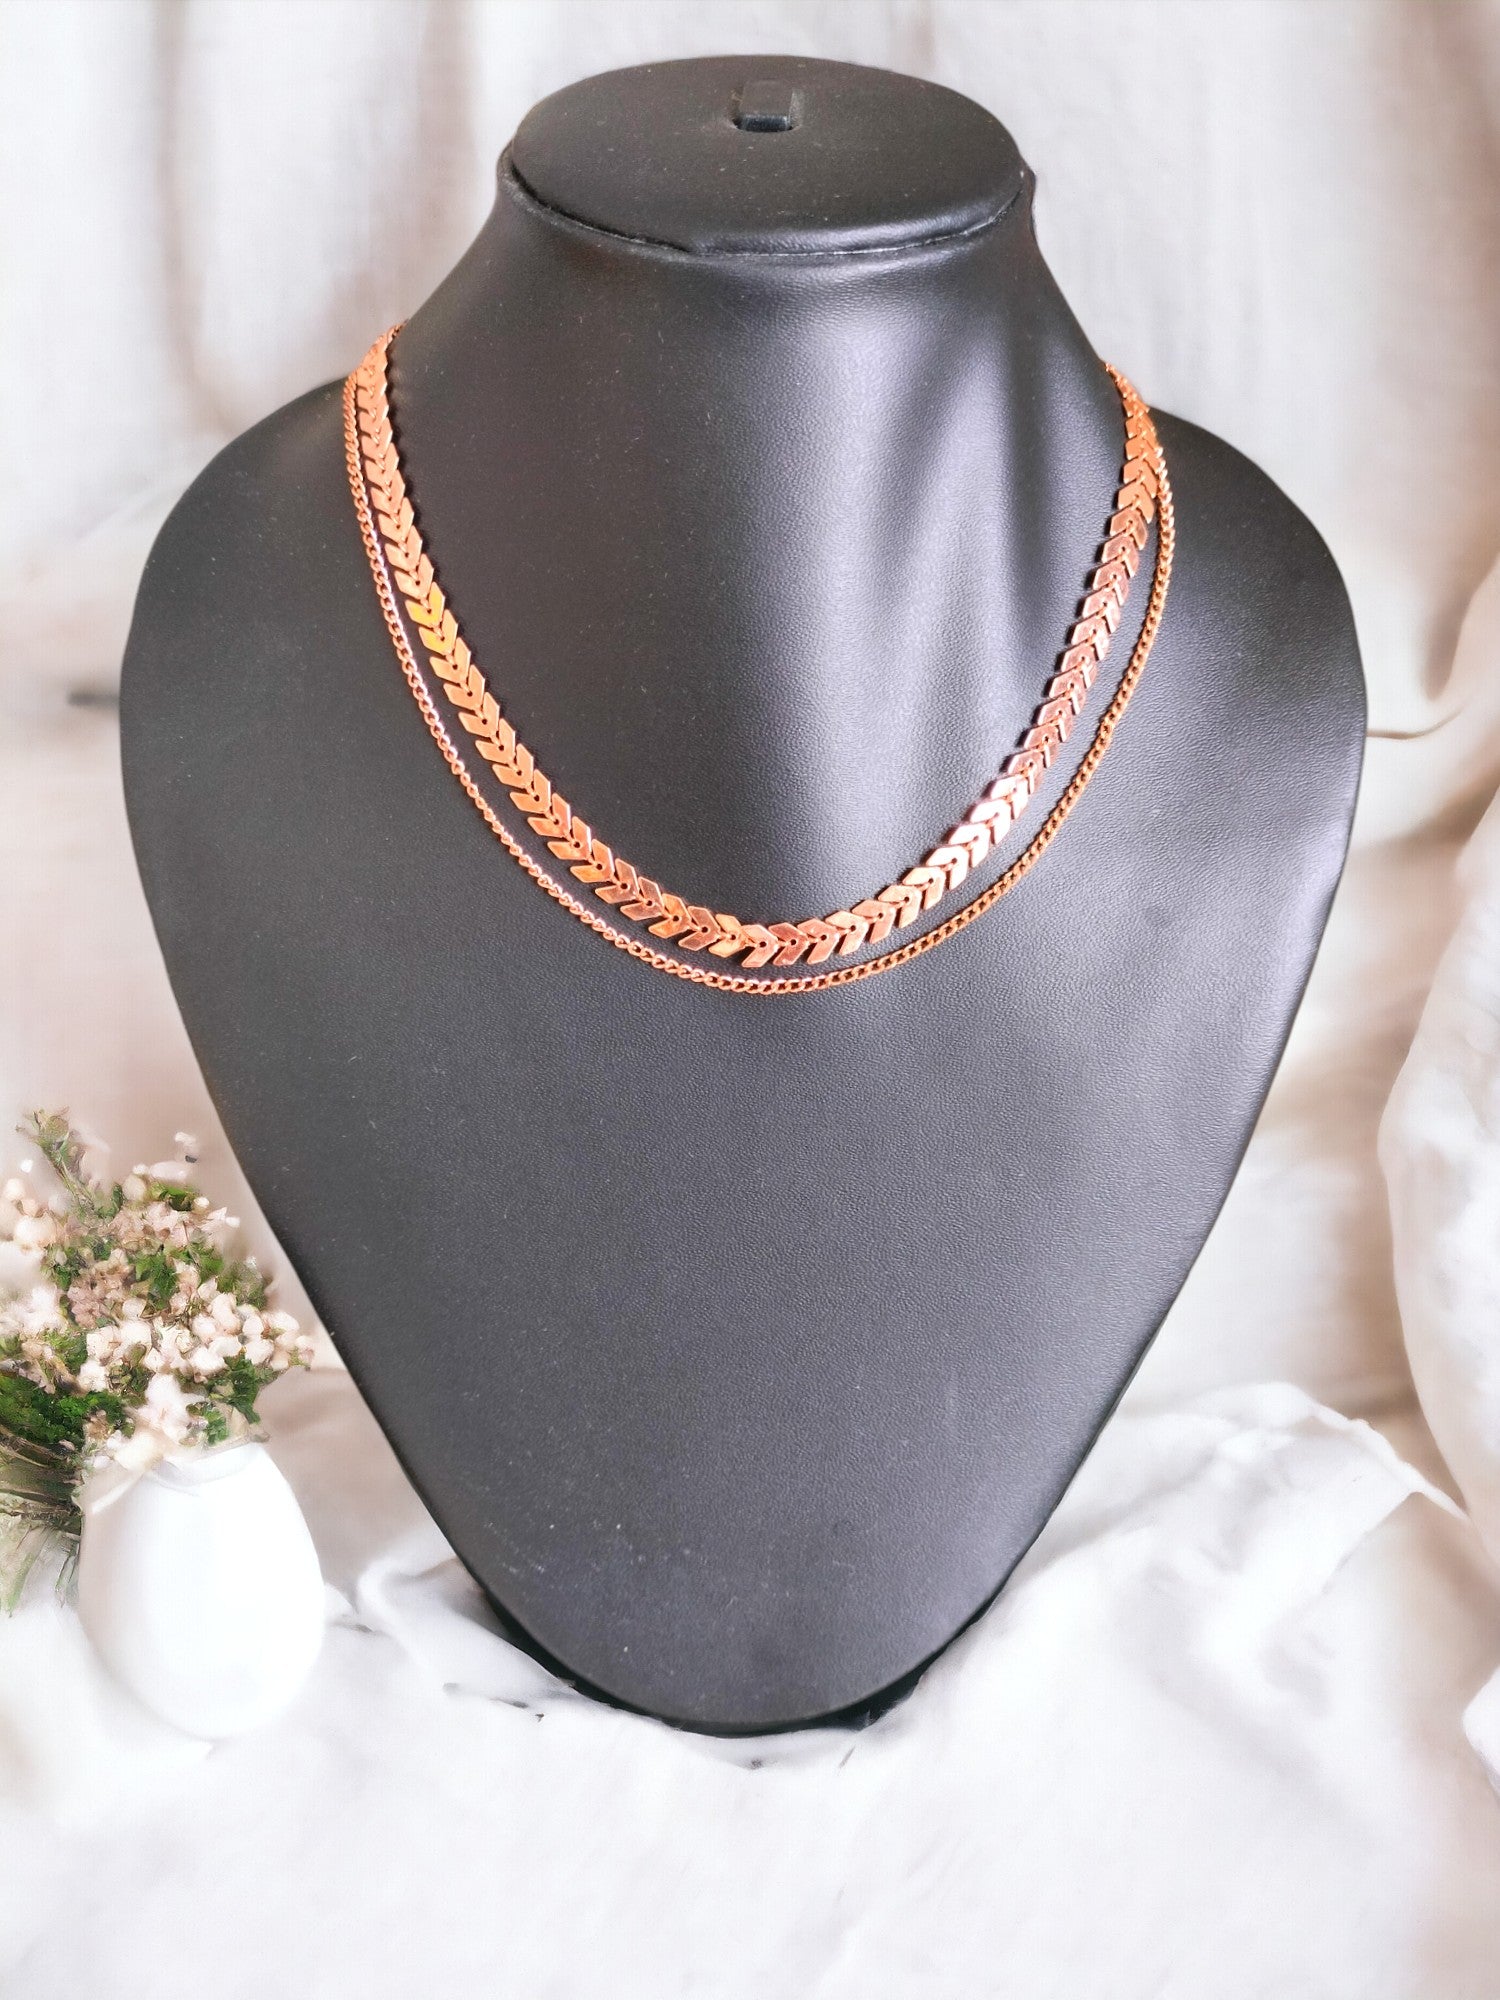 Luxe Layers -Handmade Gold Look Double Chain Choker